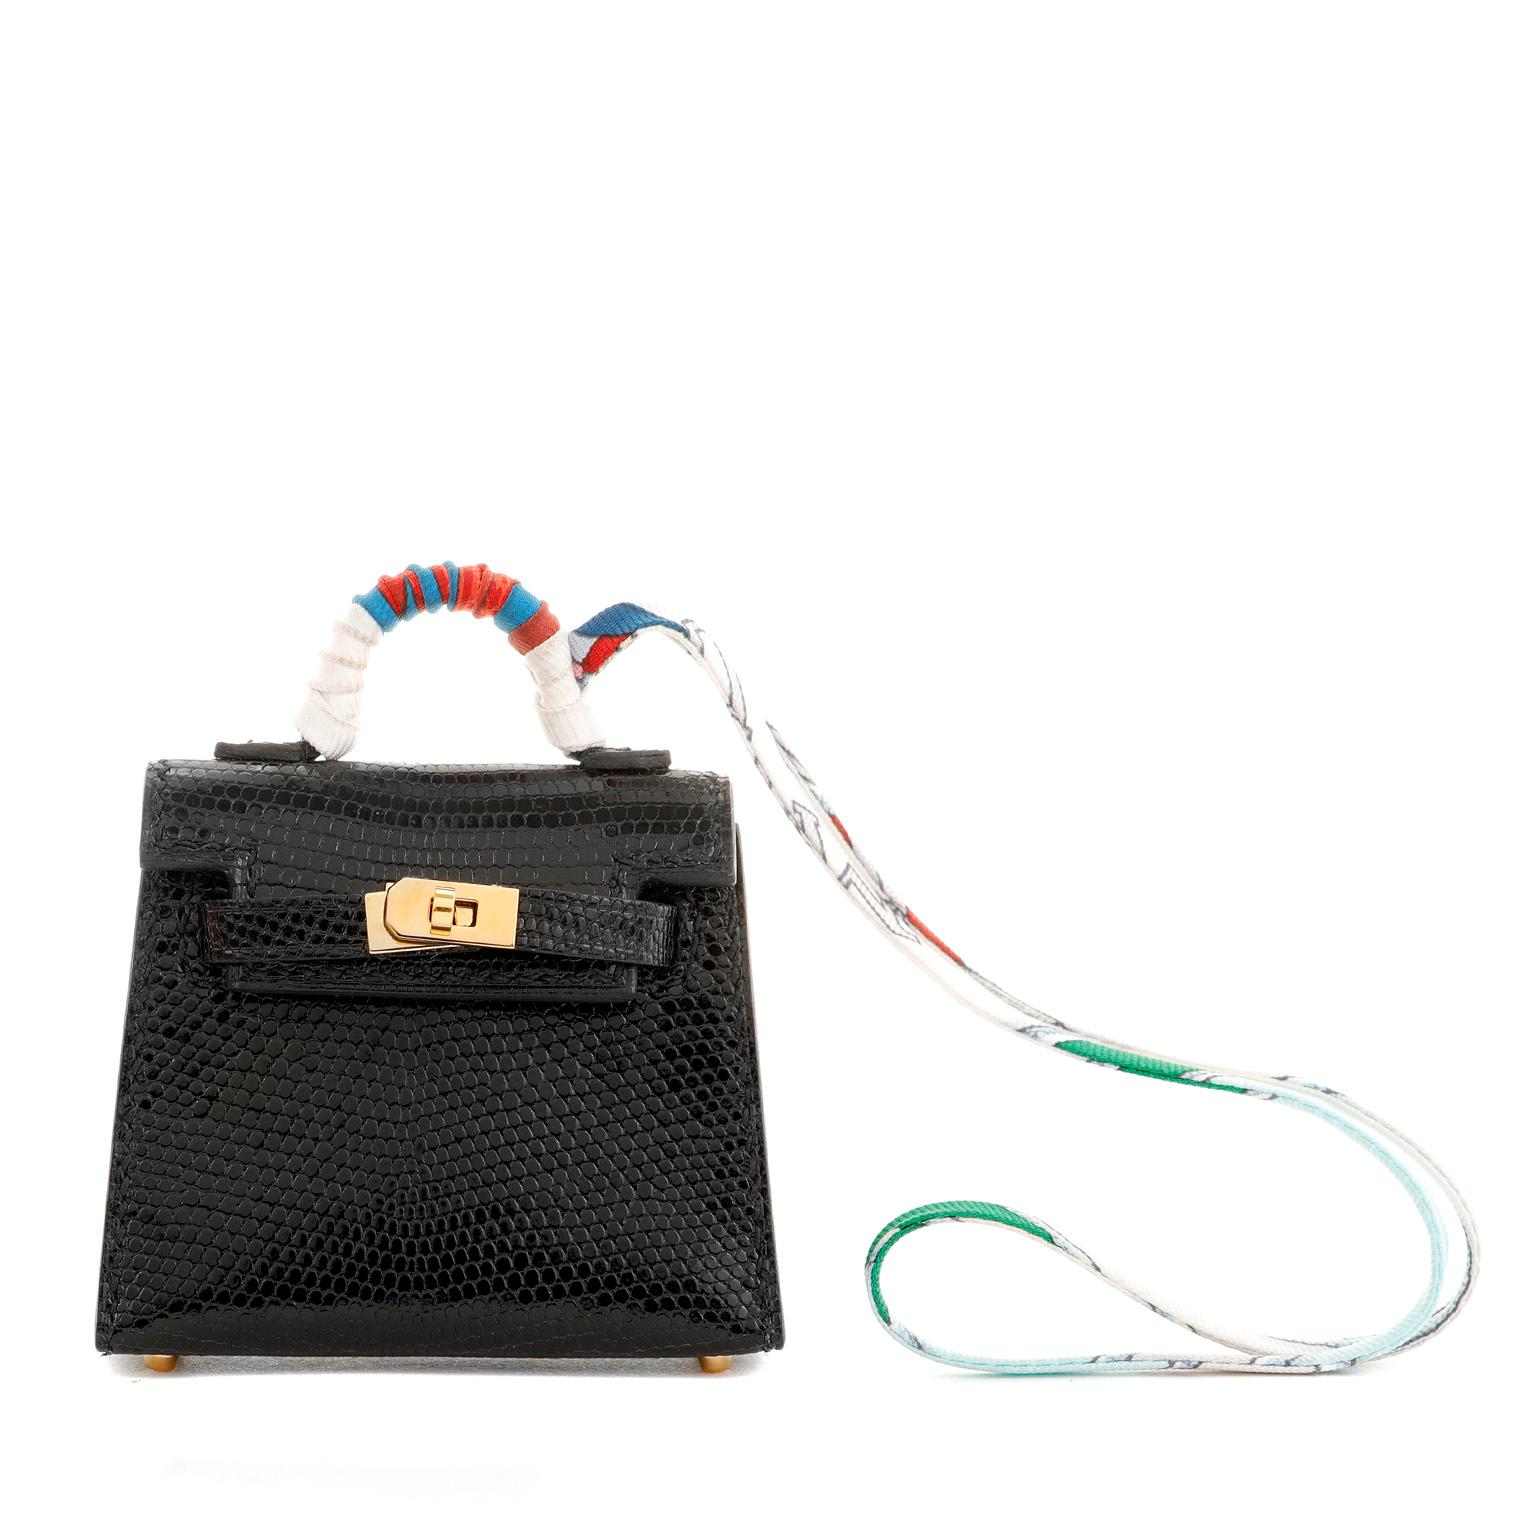 This authentic Hermès Black Lizard Micro Kelly Bag Charm is in pristine condition.  Adorned with a colorful twilly, this tiny exotic Kelly is the ultimate bag charm.  Black lizard skin with gold hardware.  Box and twilly included.

Measurements: 